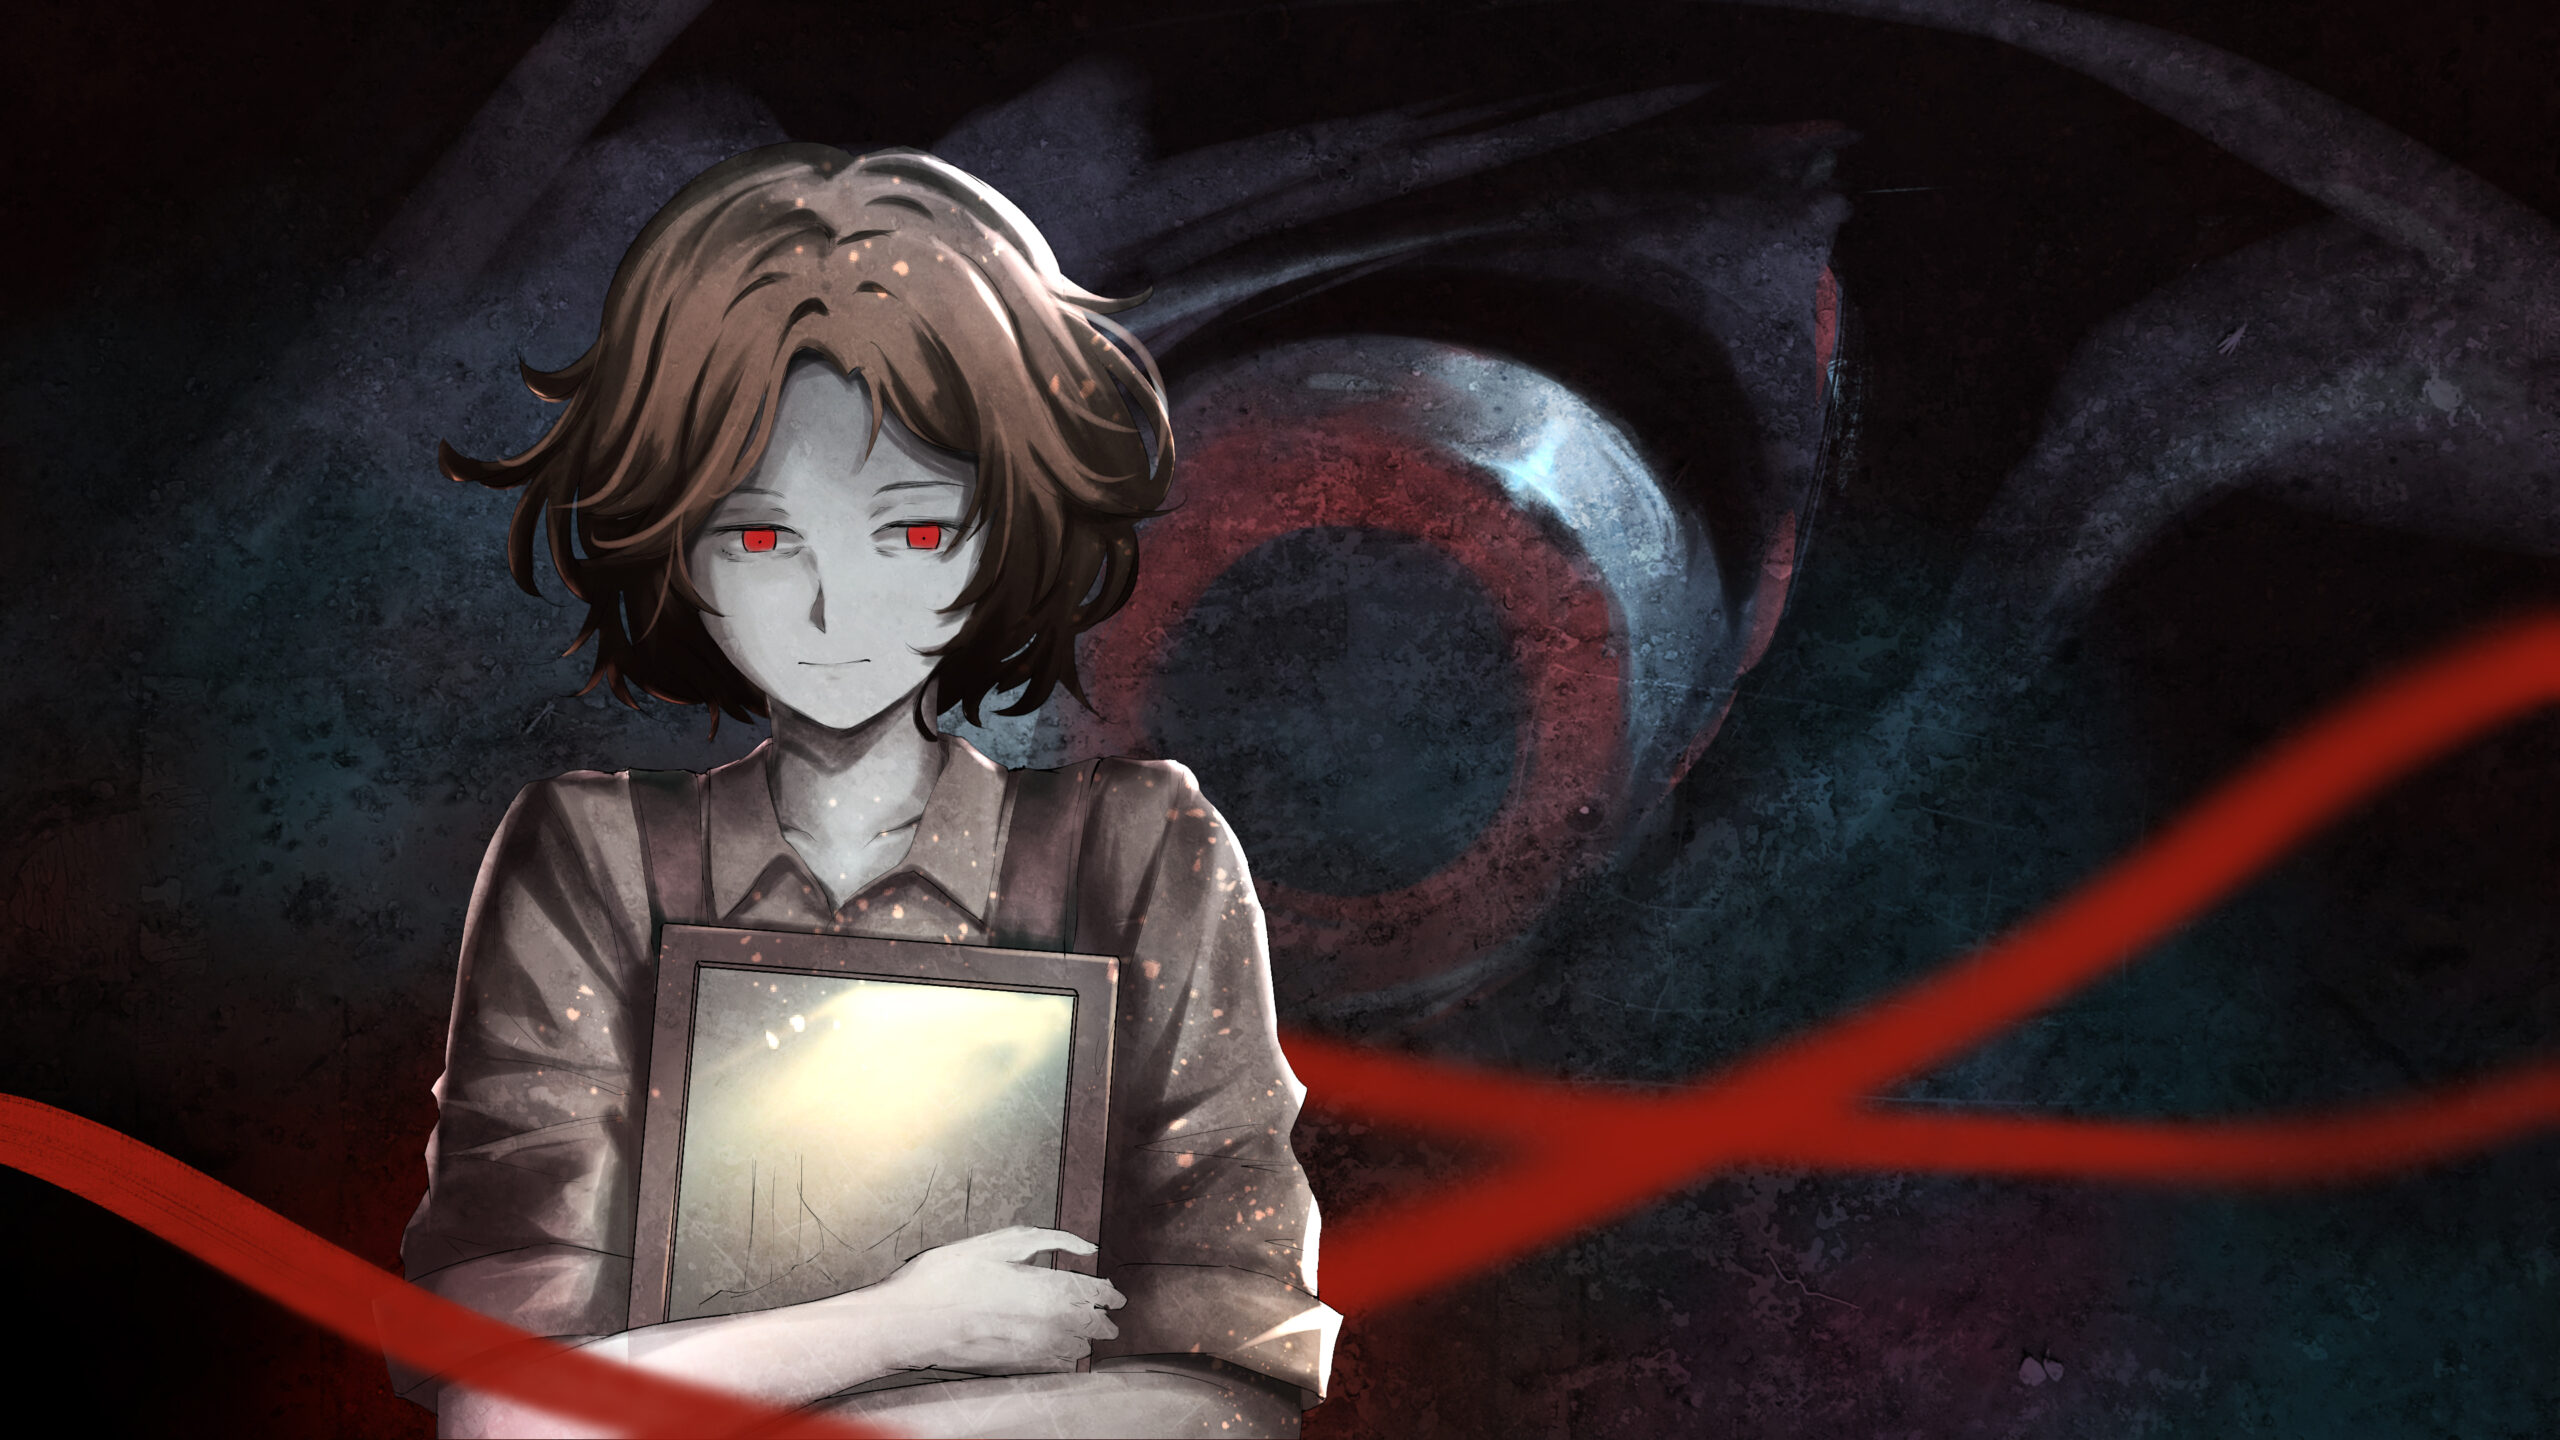 Rose with a picture and a demonic eye behind her plus red lines scaled